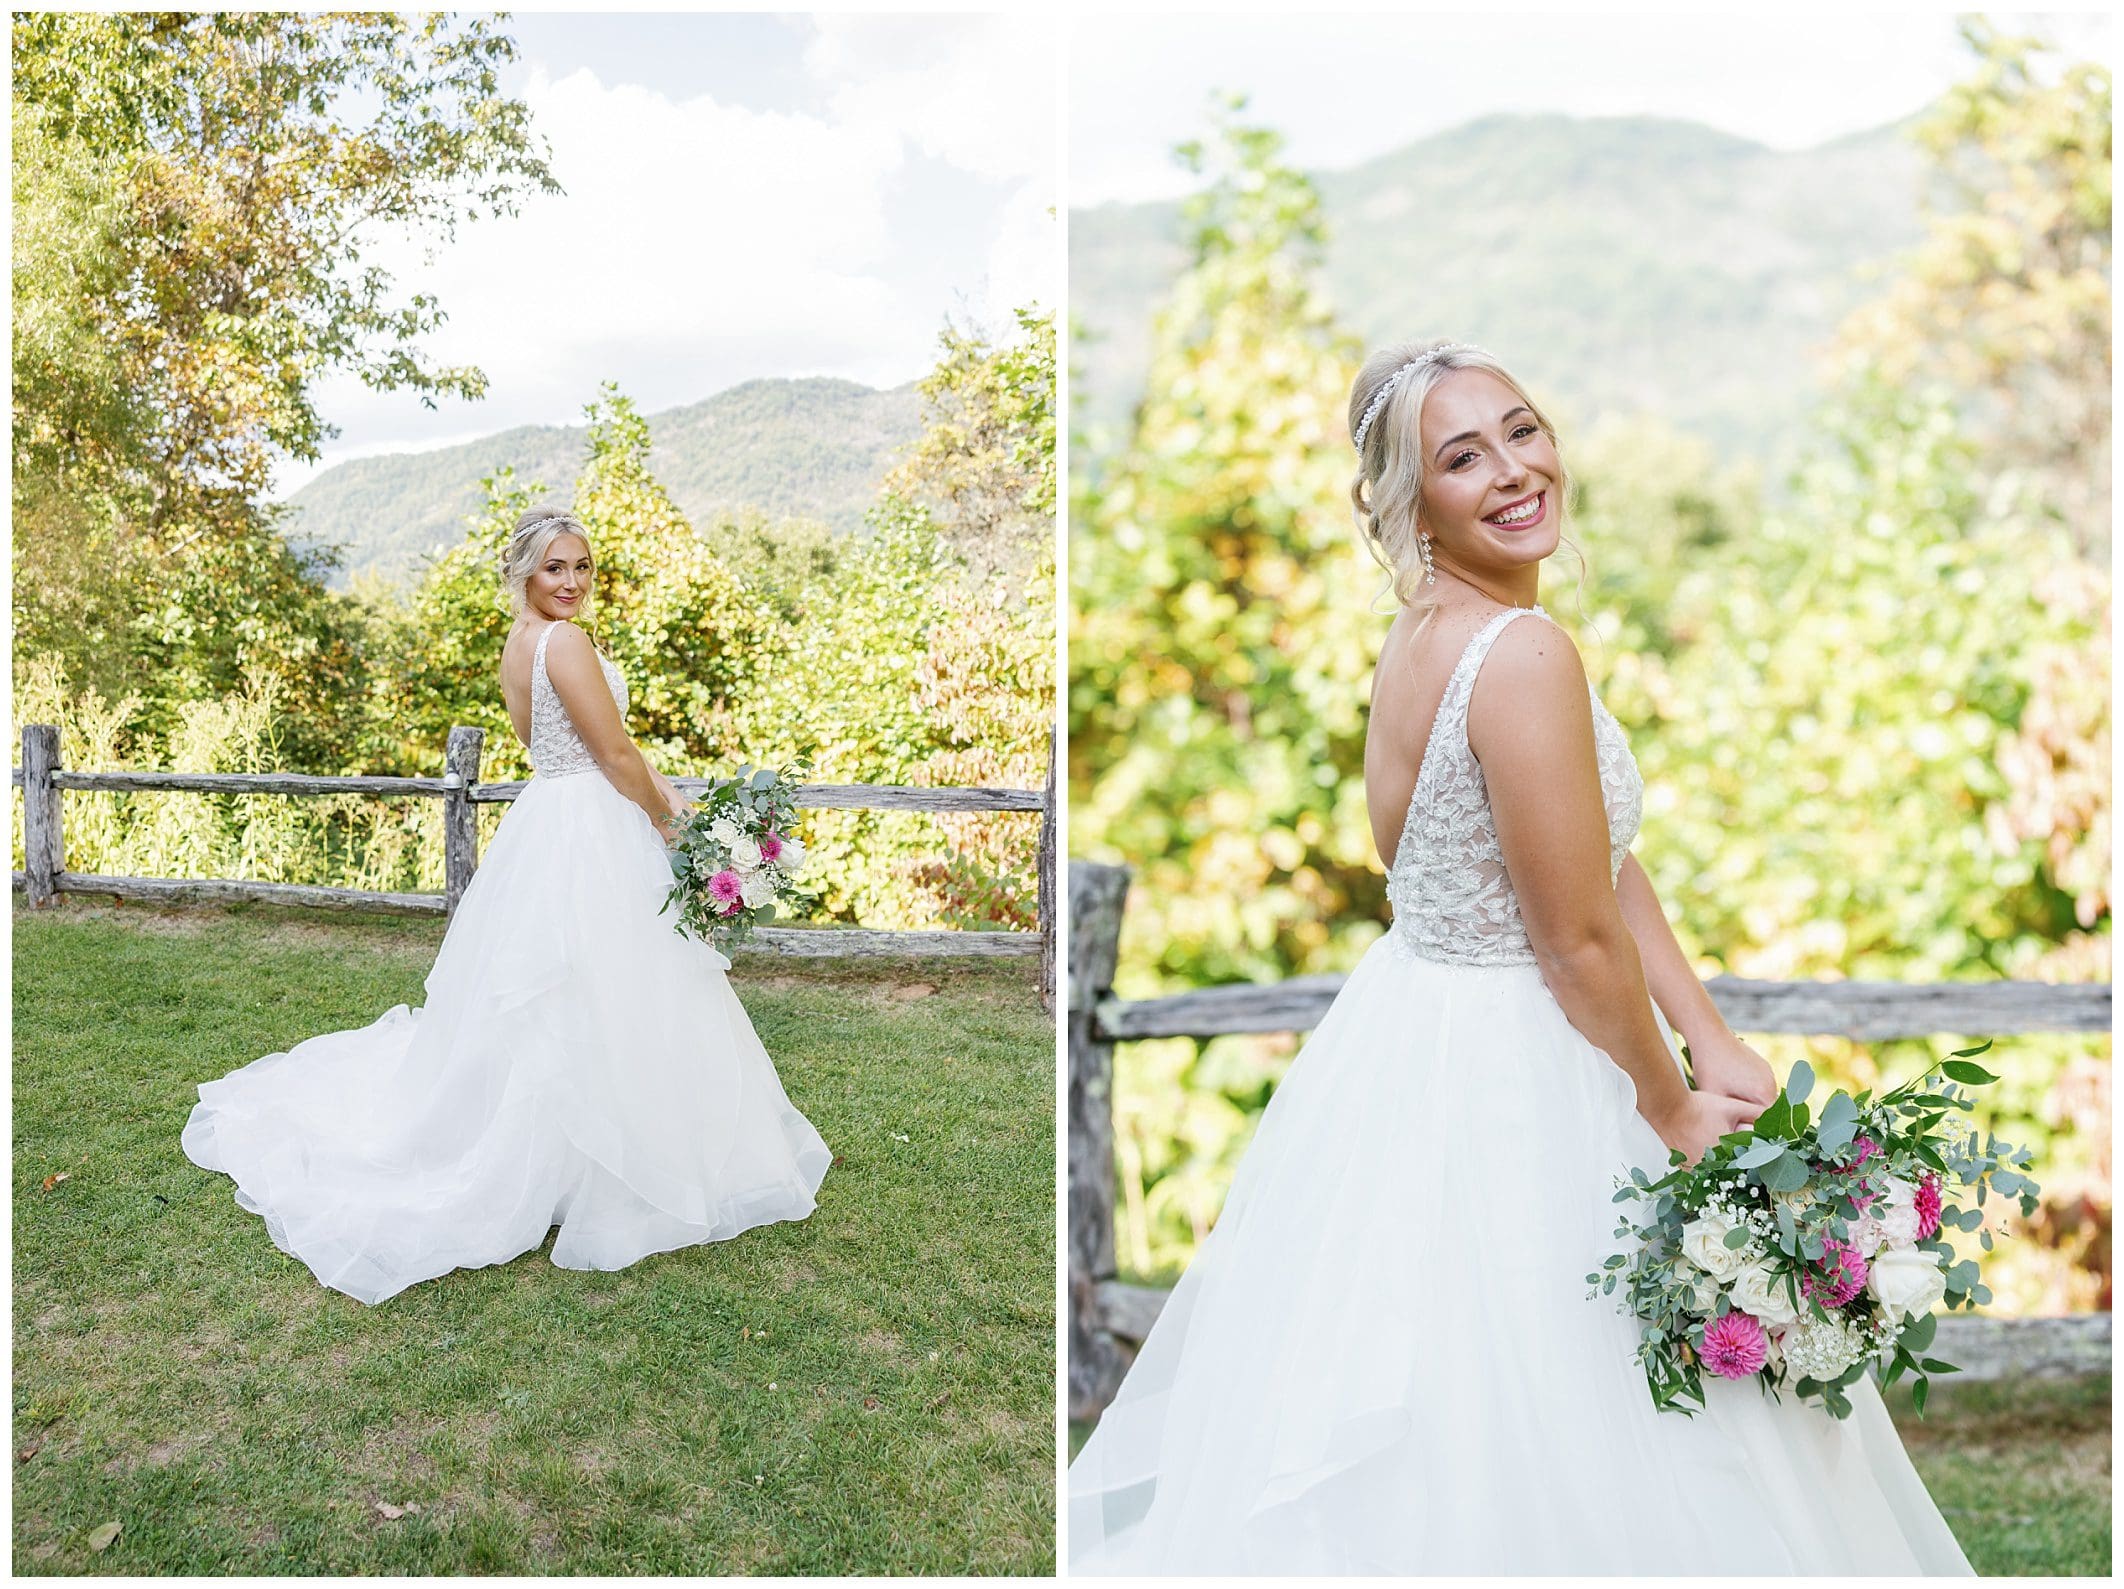 A bride poses for a photo in front of a vineyard.